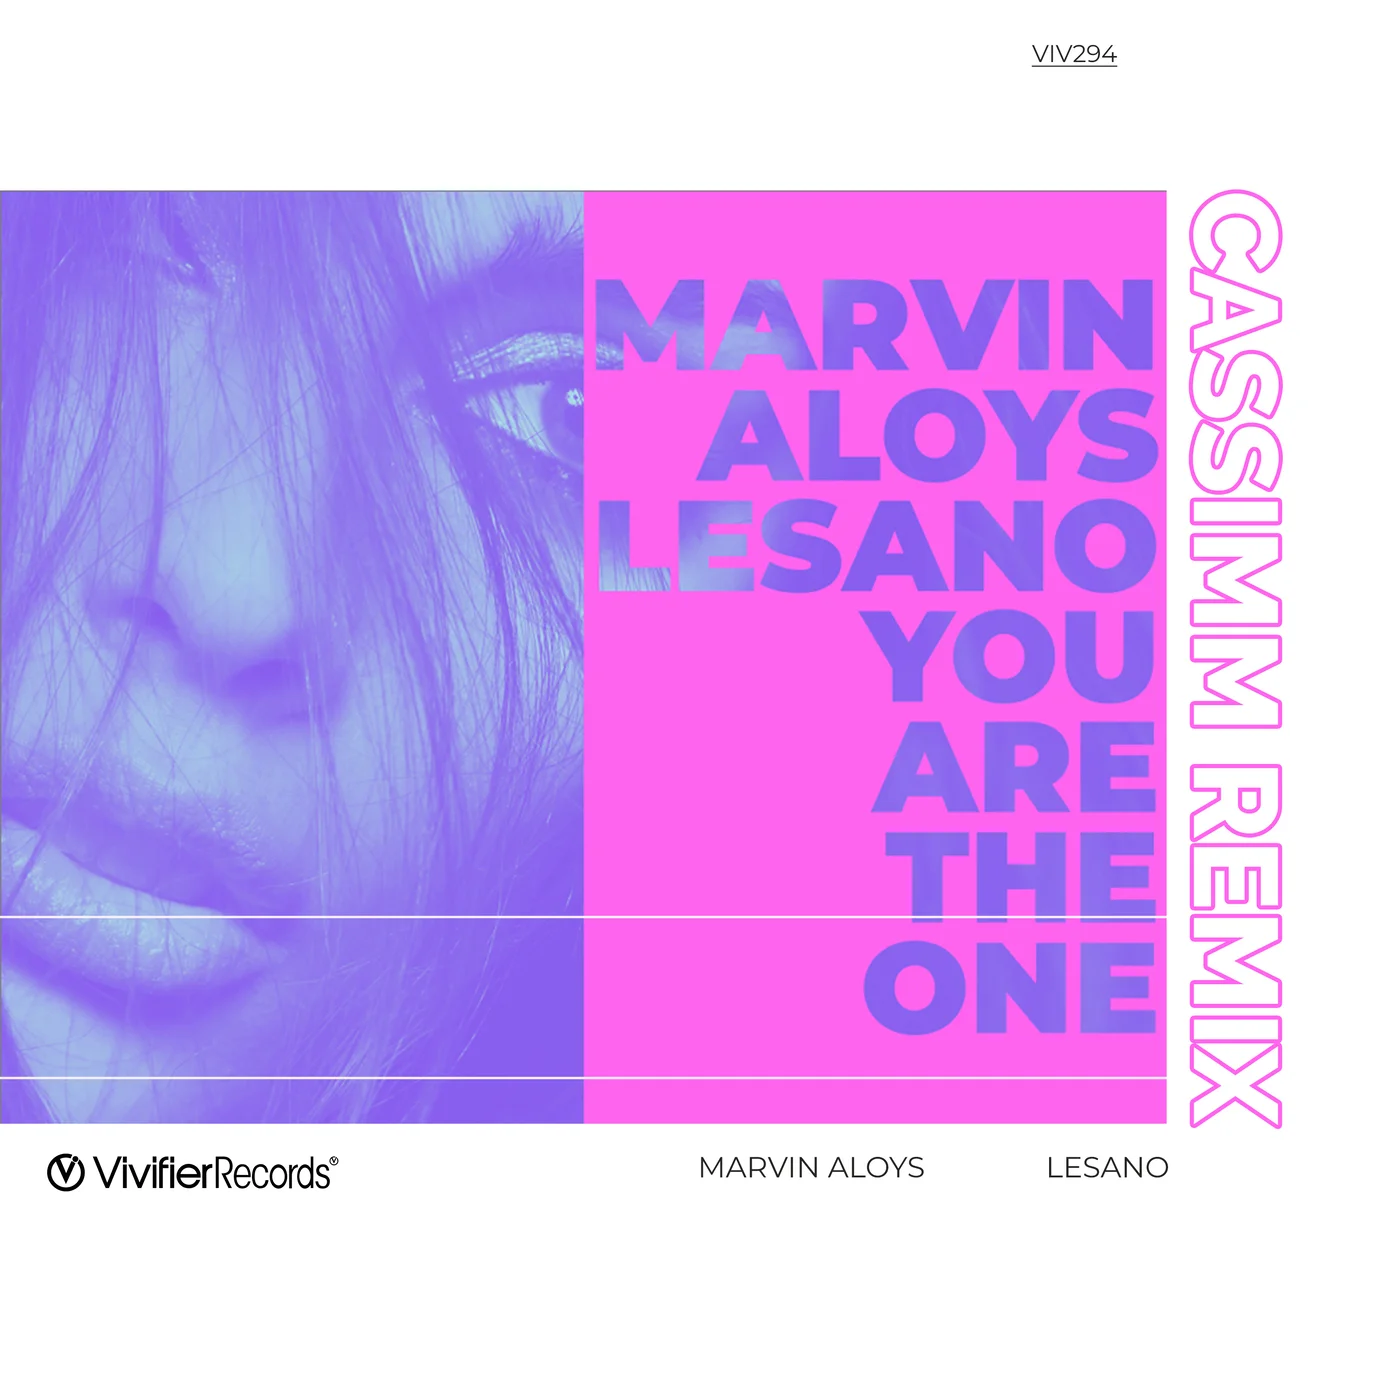 Marvin Aloys - You Are The One (Cassimm Extended Remix)